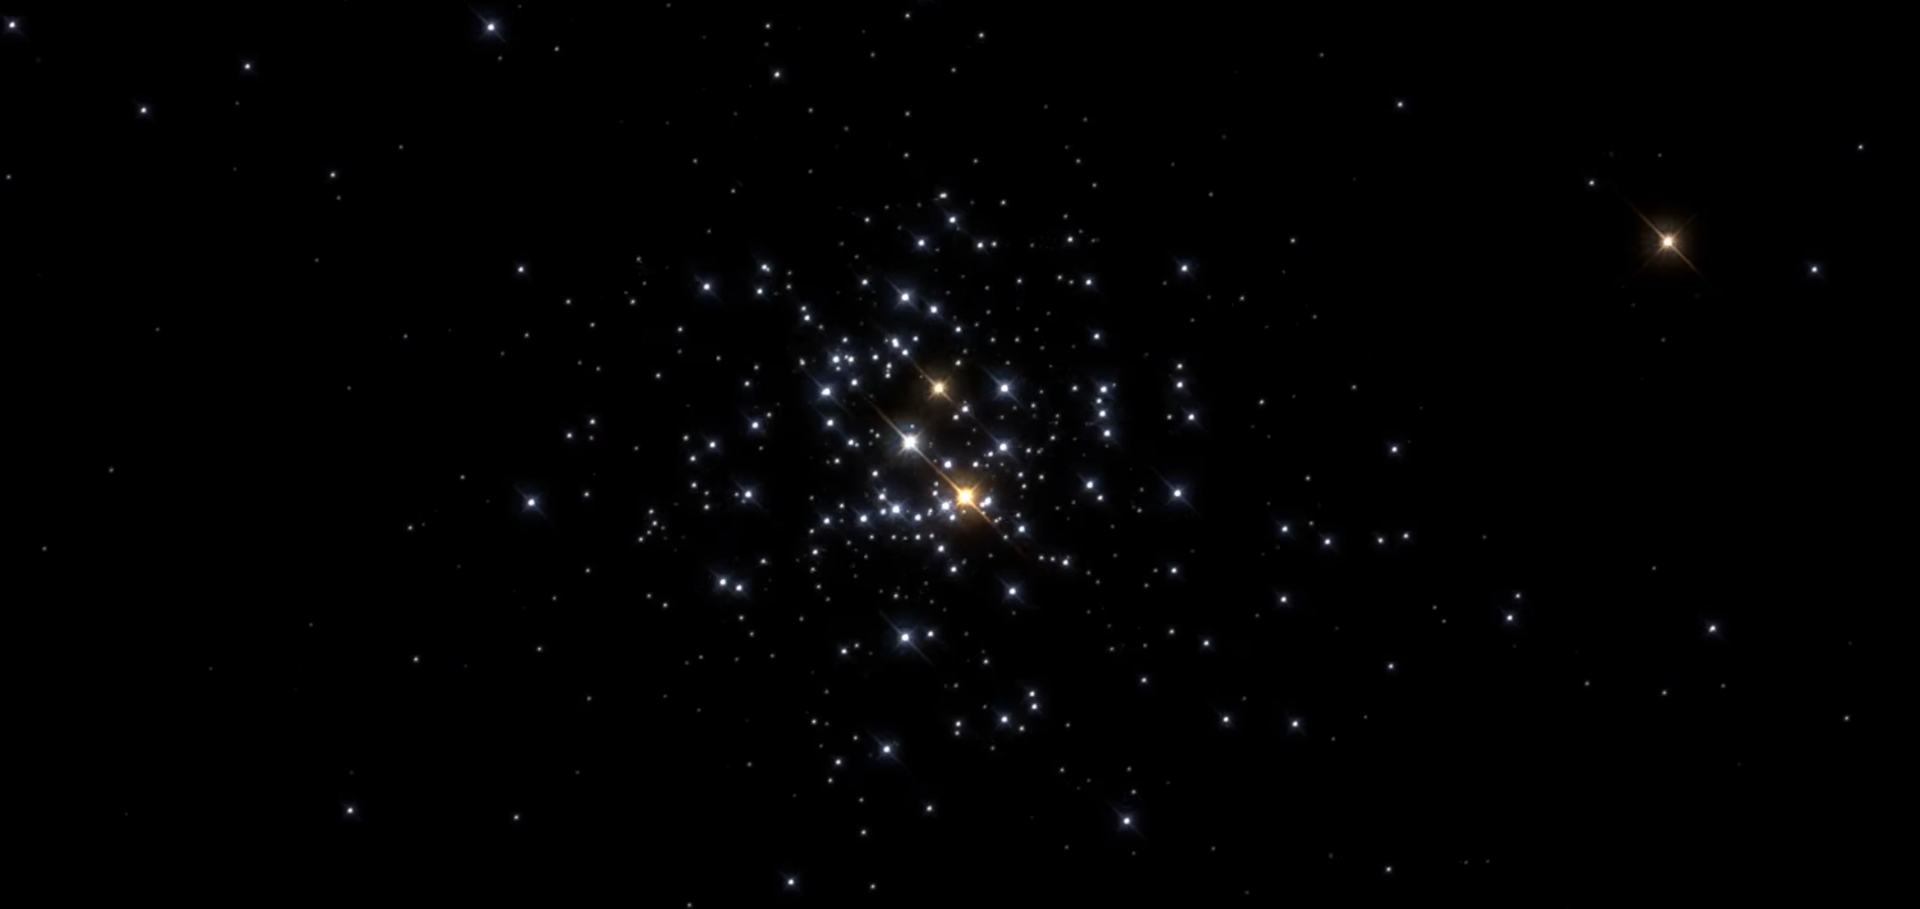 A star cluster simulation (credit: Inti Pelupessy)